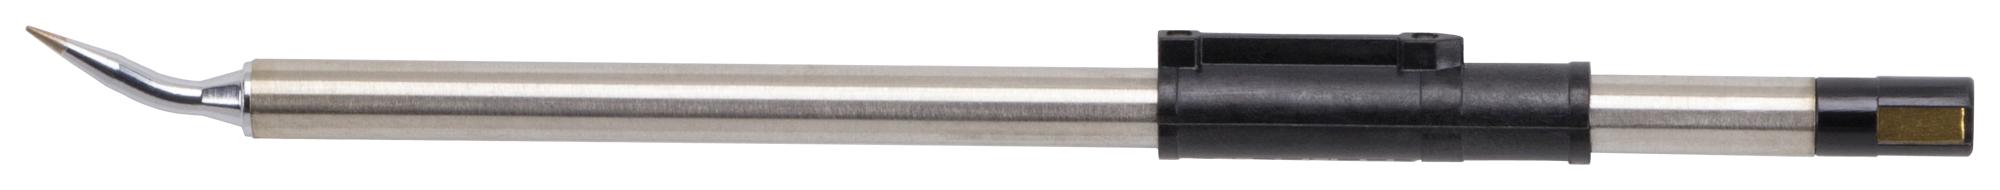 1124-0015-P1 TIP CARTRIDGE, CONICAL, SHARP, 1/64" PACE